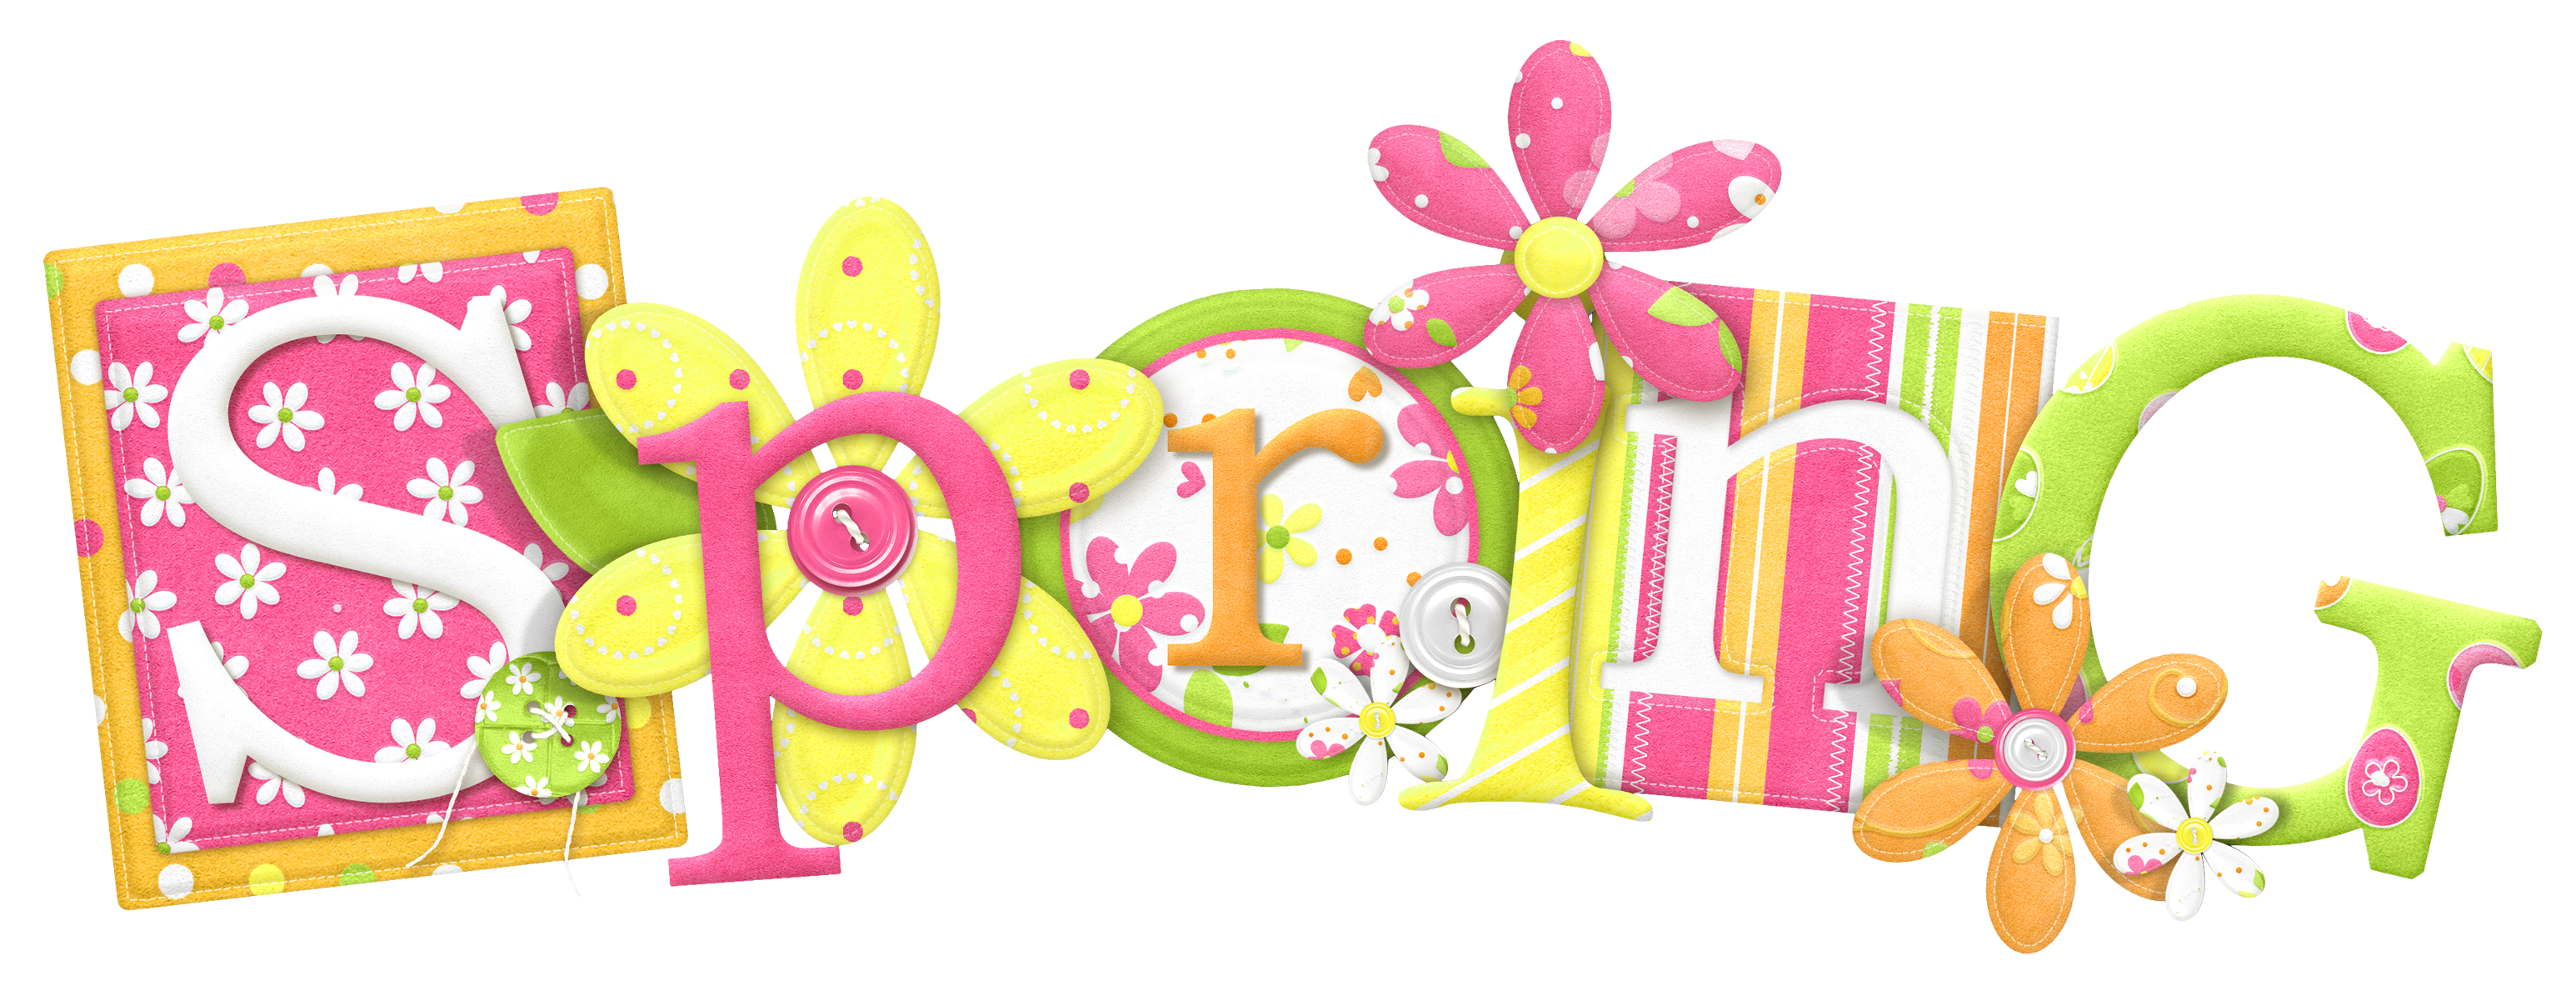 Spring PNG Clipart Picture | Gallery Yopriceville - High ...